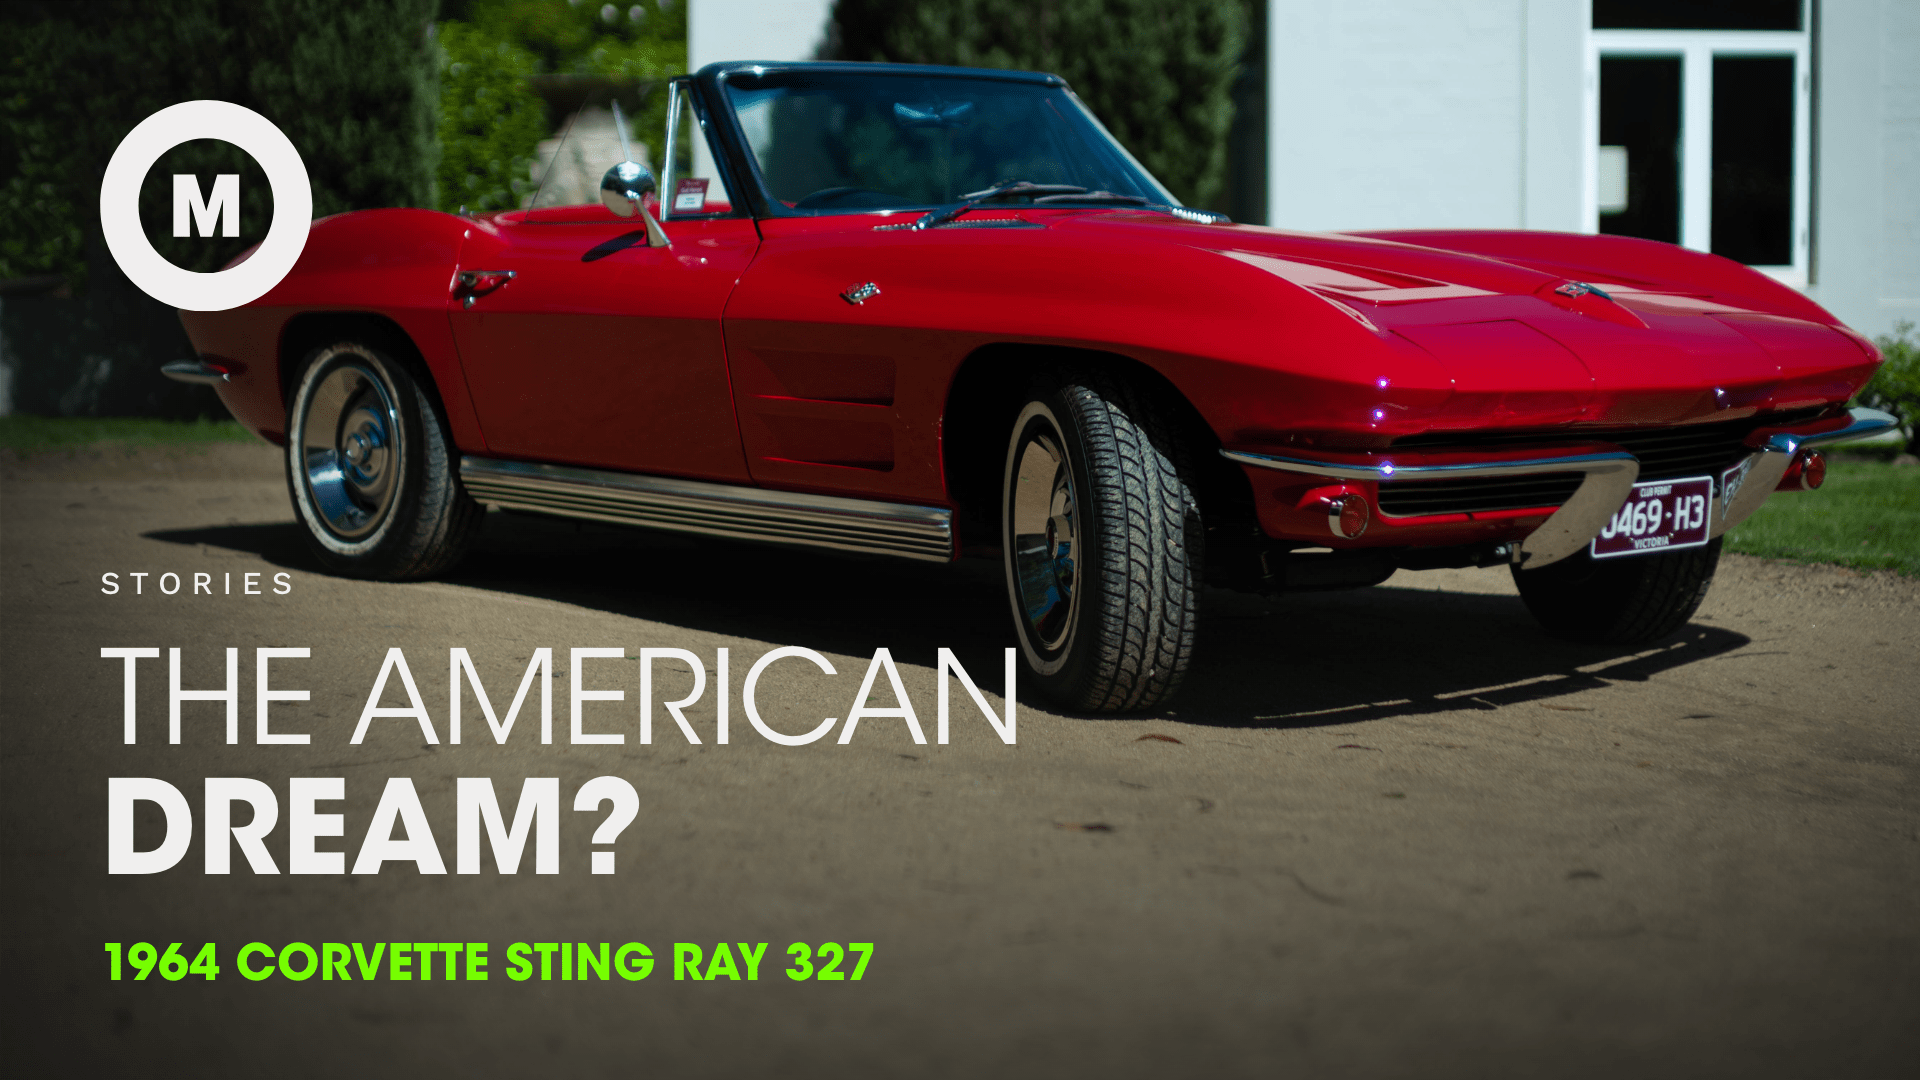 009__1964_CORVETTE_STING_RAY_327_YOUTUBE-THUMB_EPISODE-STORIES-01.png